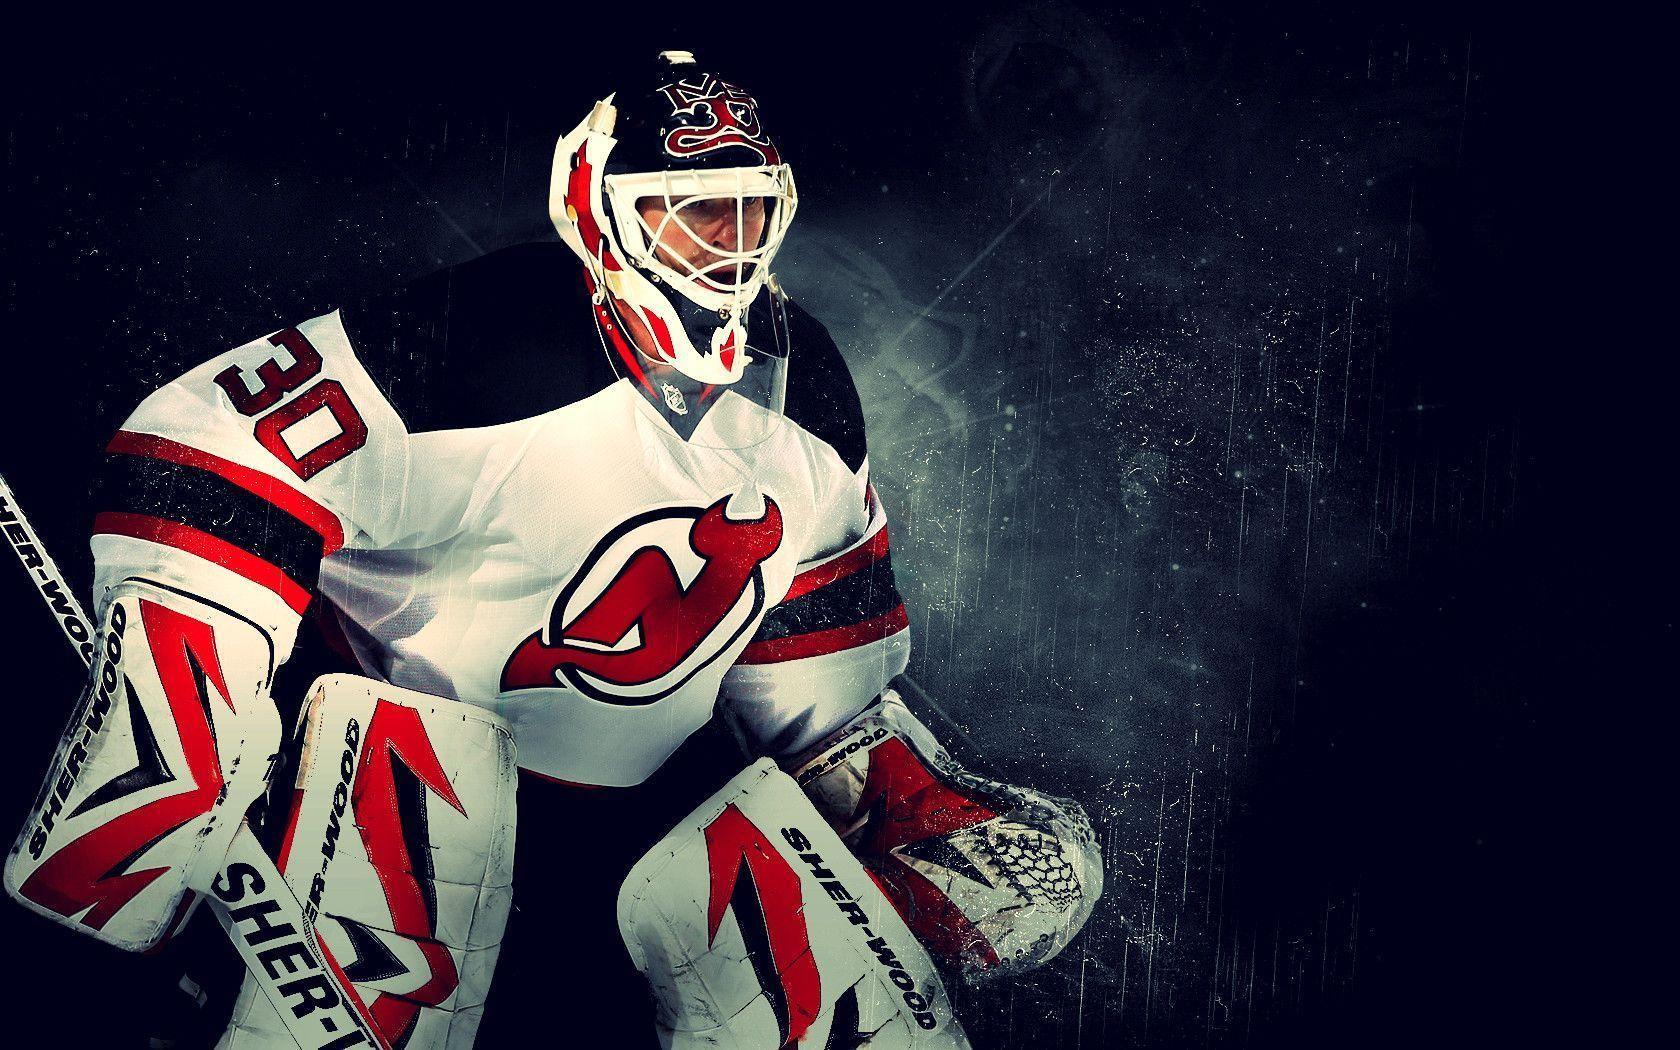 Download High-resolution image of New Jersey Devils' home court. Wallpaper